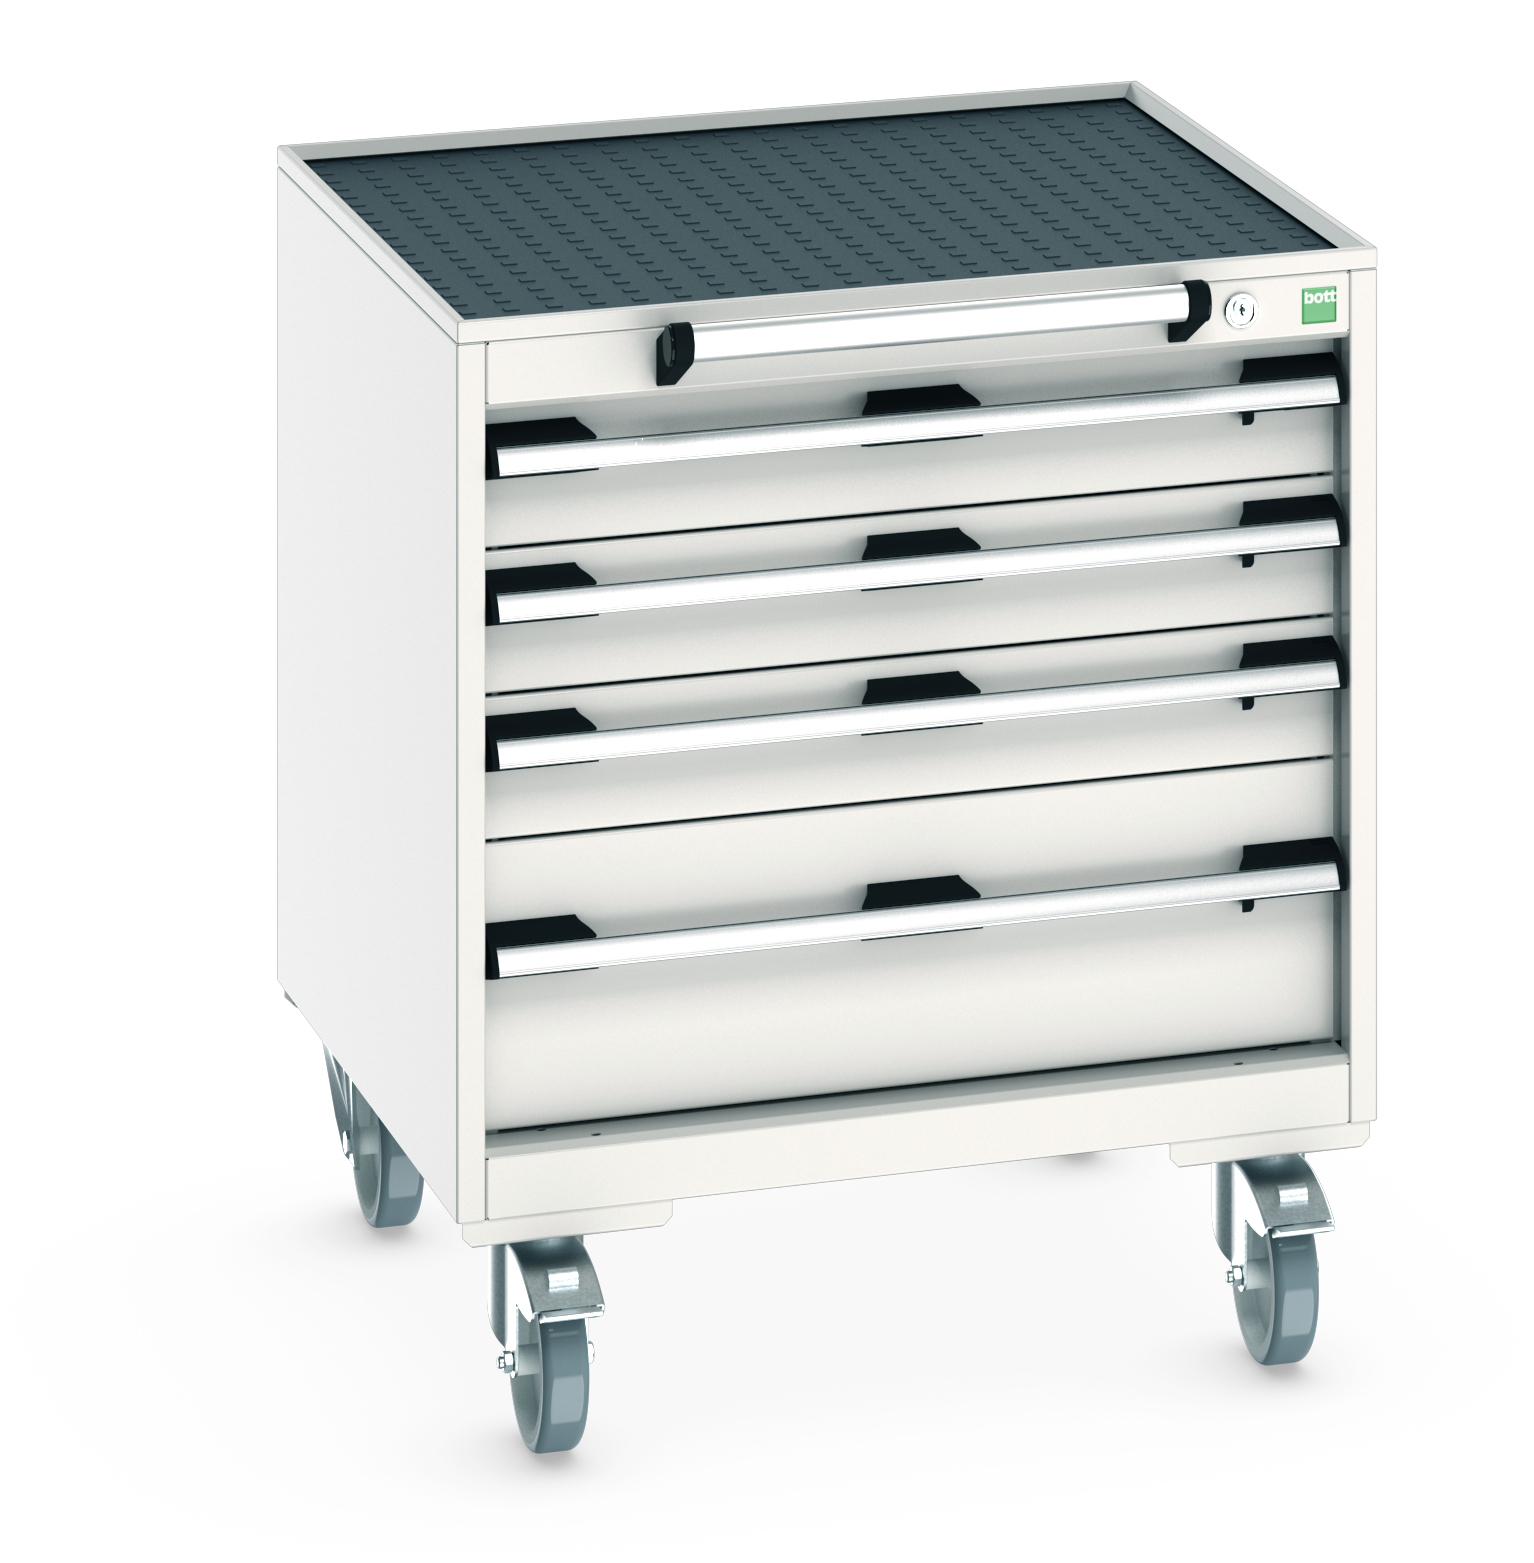 Bott Cubio Mobile Drawer Cabinet With 4 Drawers & Top Tray With Mat - 40402023.16V